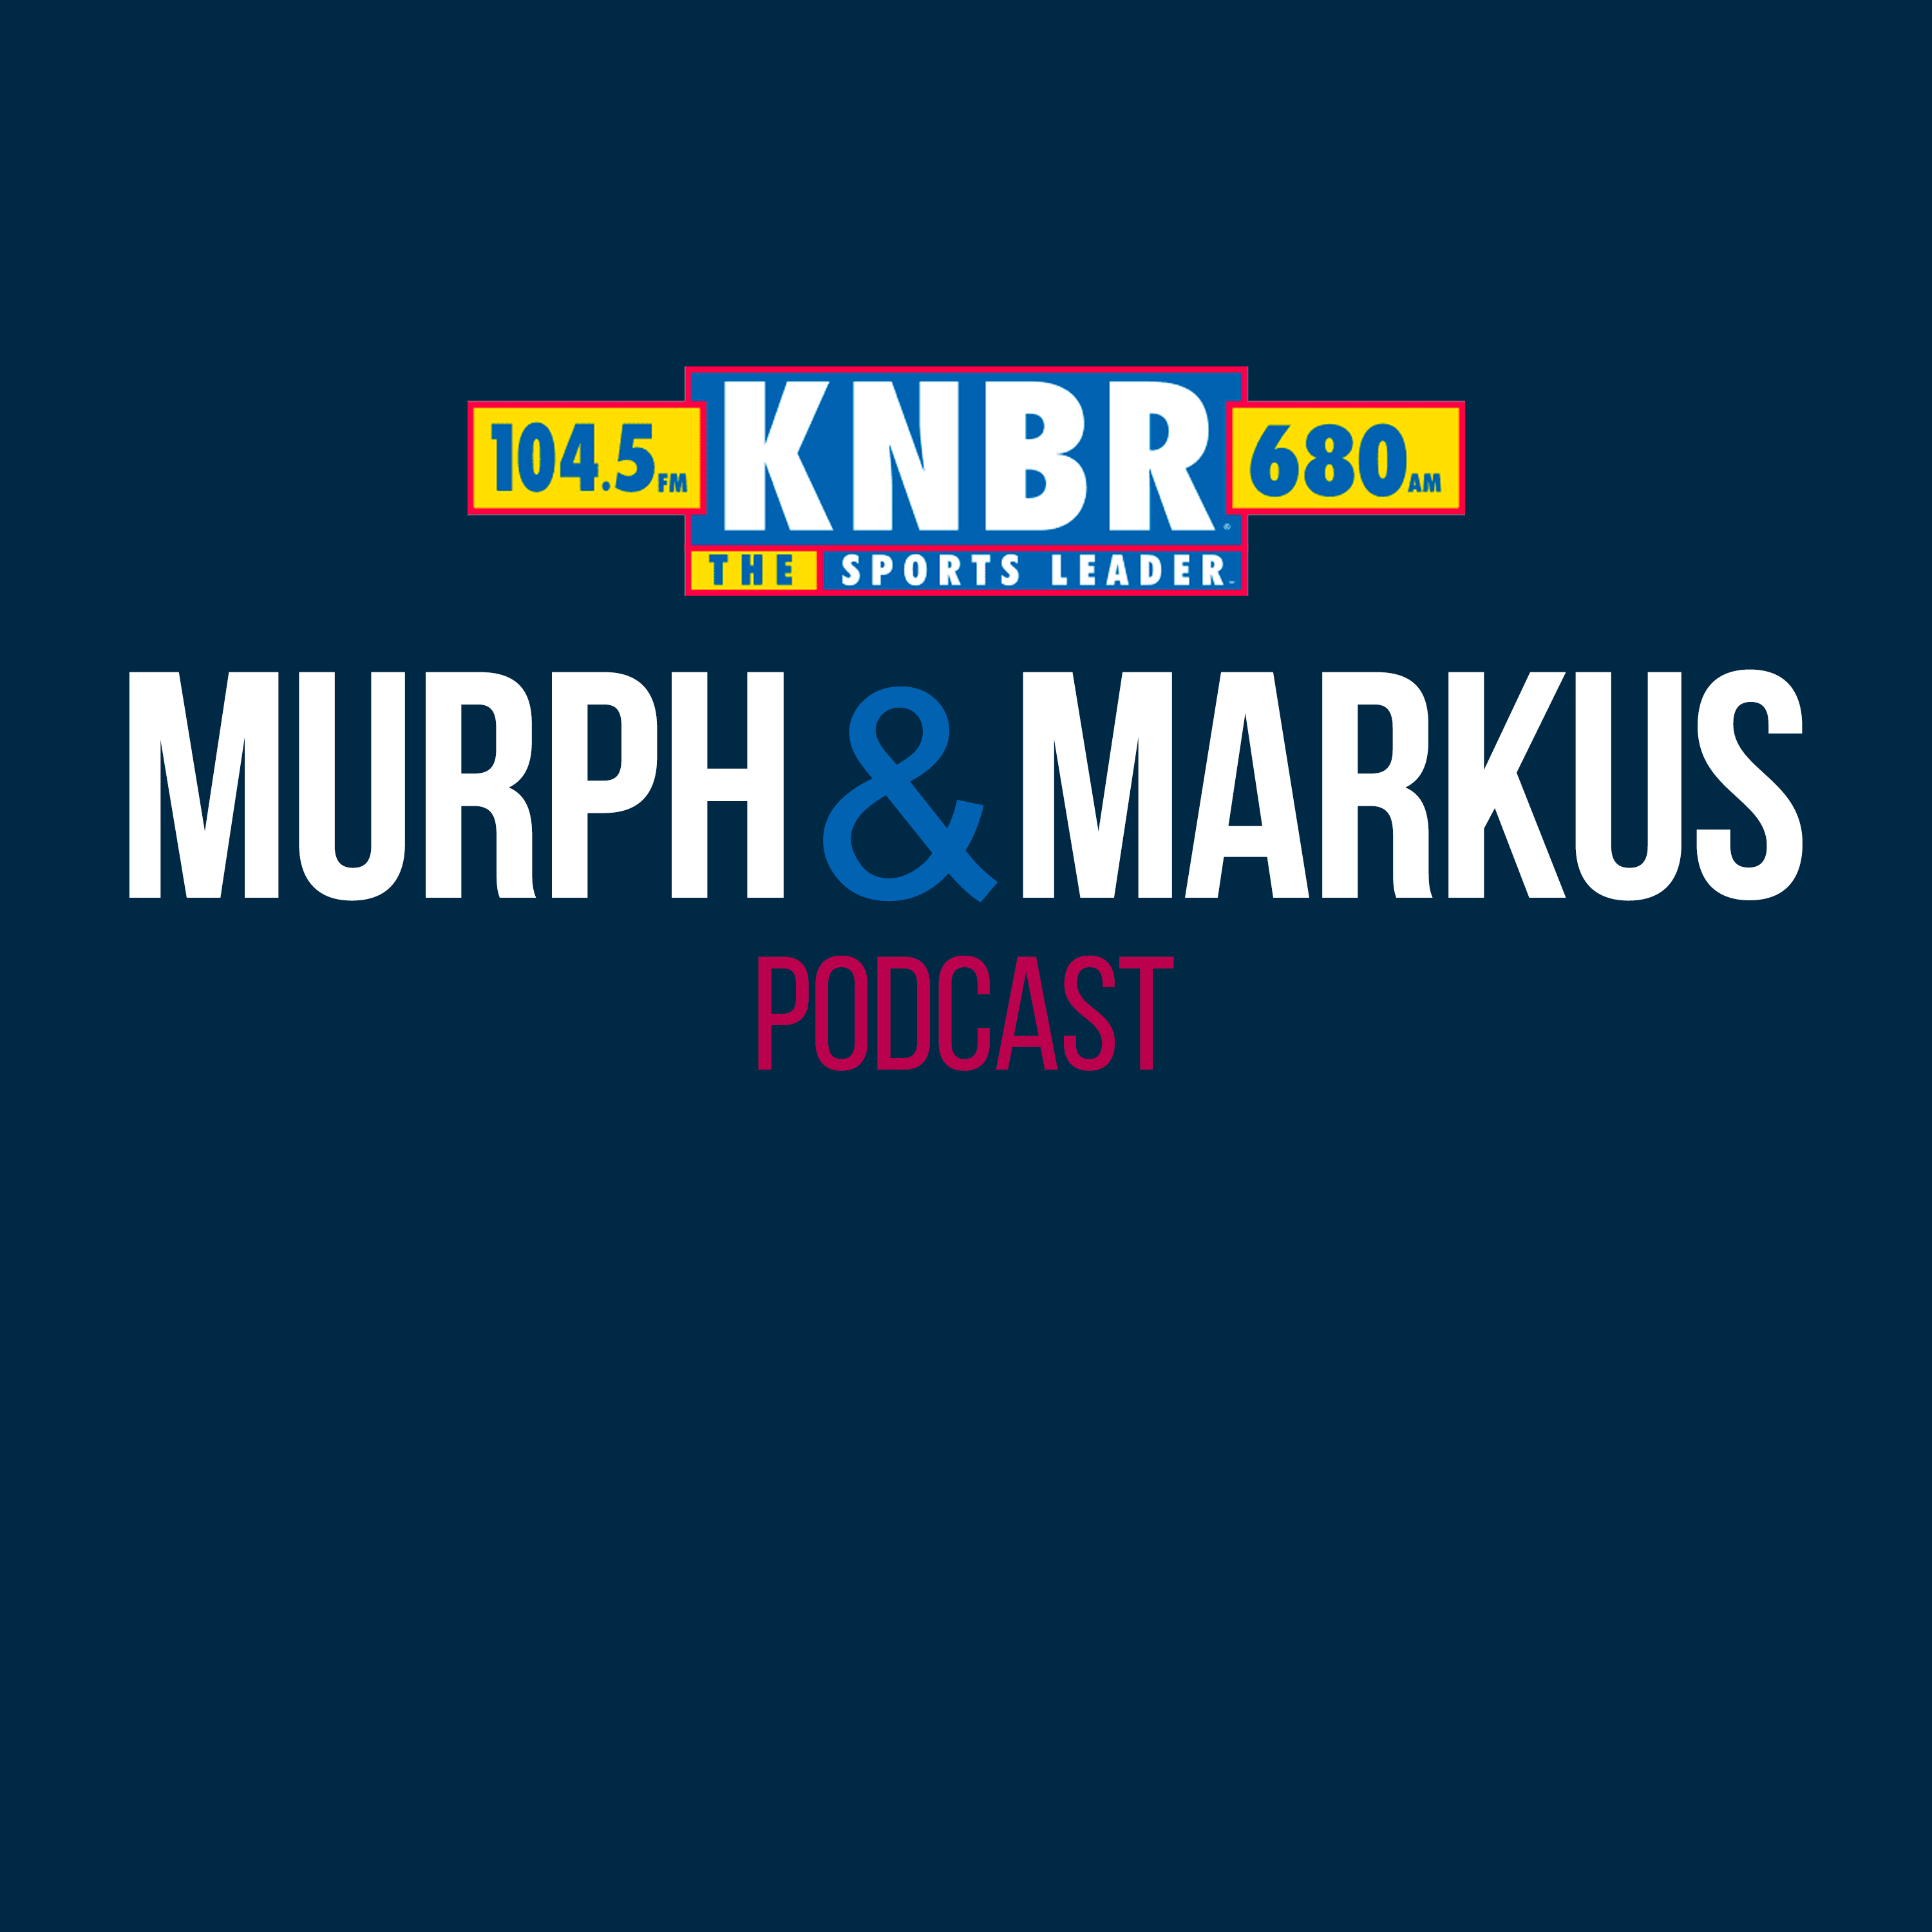 5-14 Duane Kuiper joined Murph and Markus to discuss the Giants loss to the Dodgers but also tells us the parts that stood out in the game